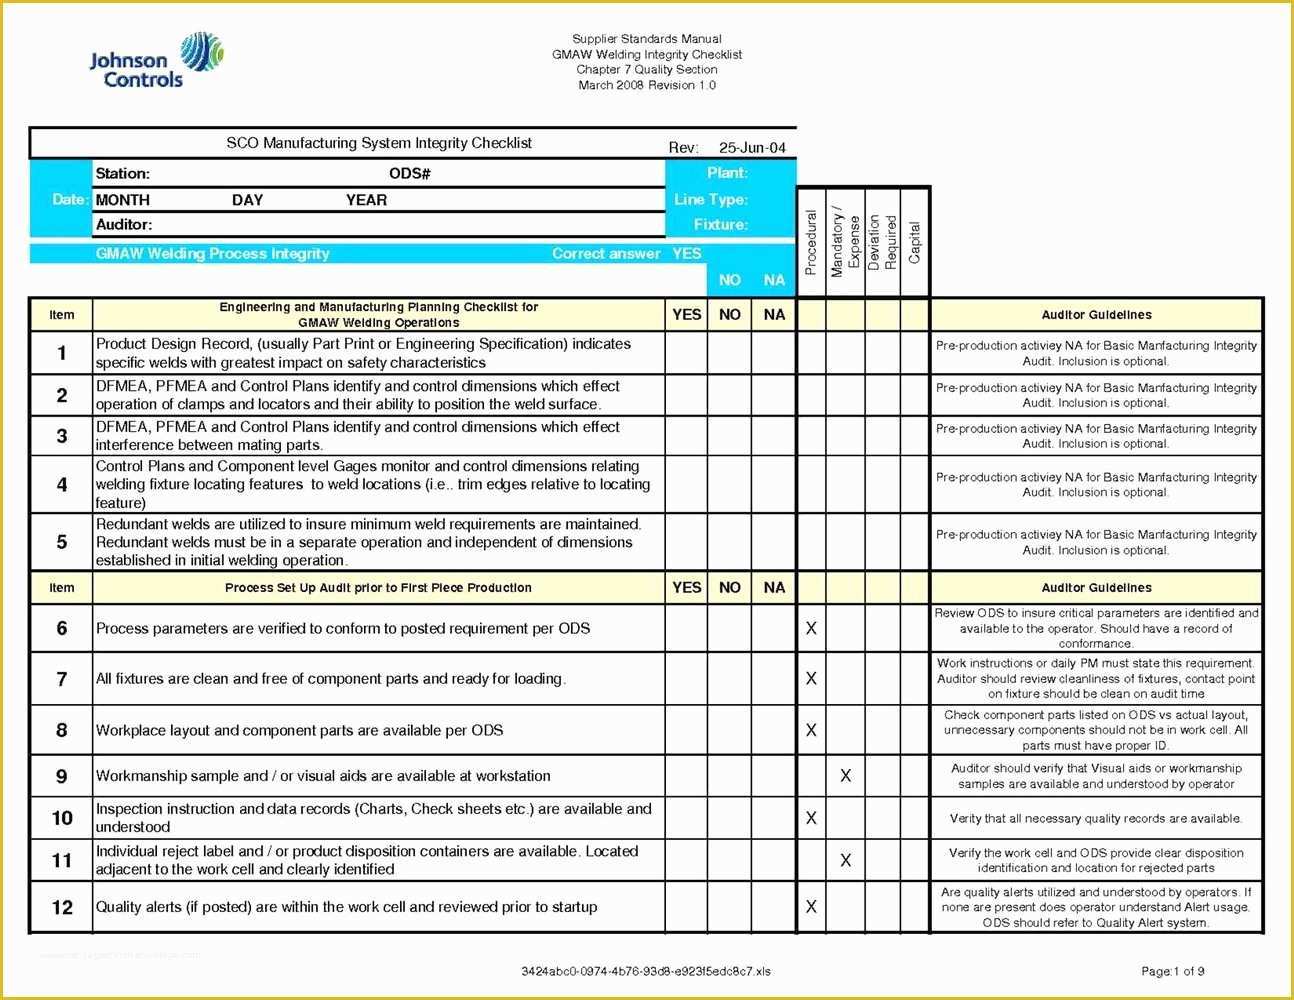 Iso 9001 forms Templates Free Of iso 9001 forms Templates Free forms 7872